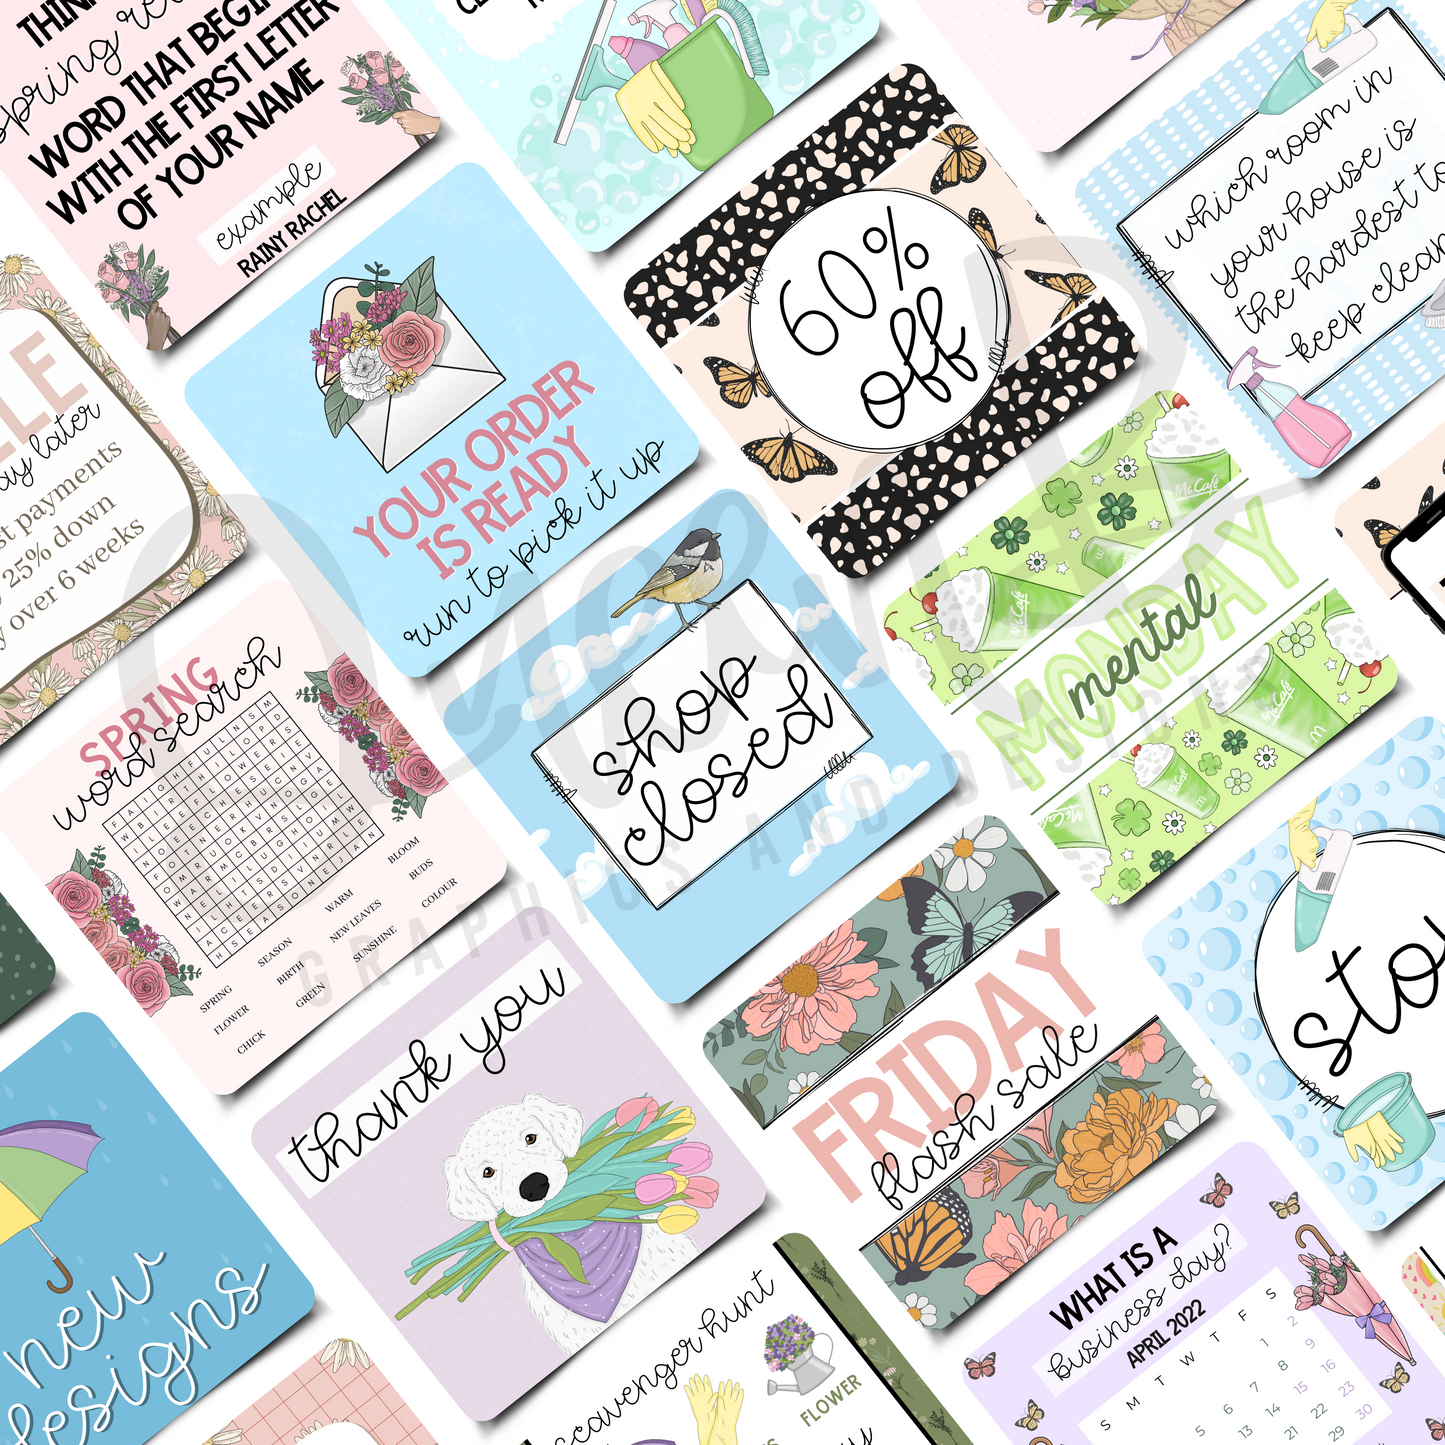 Spring Business Engagement & Social Media Content Graphics Collection